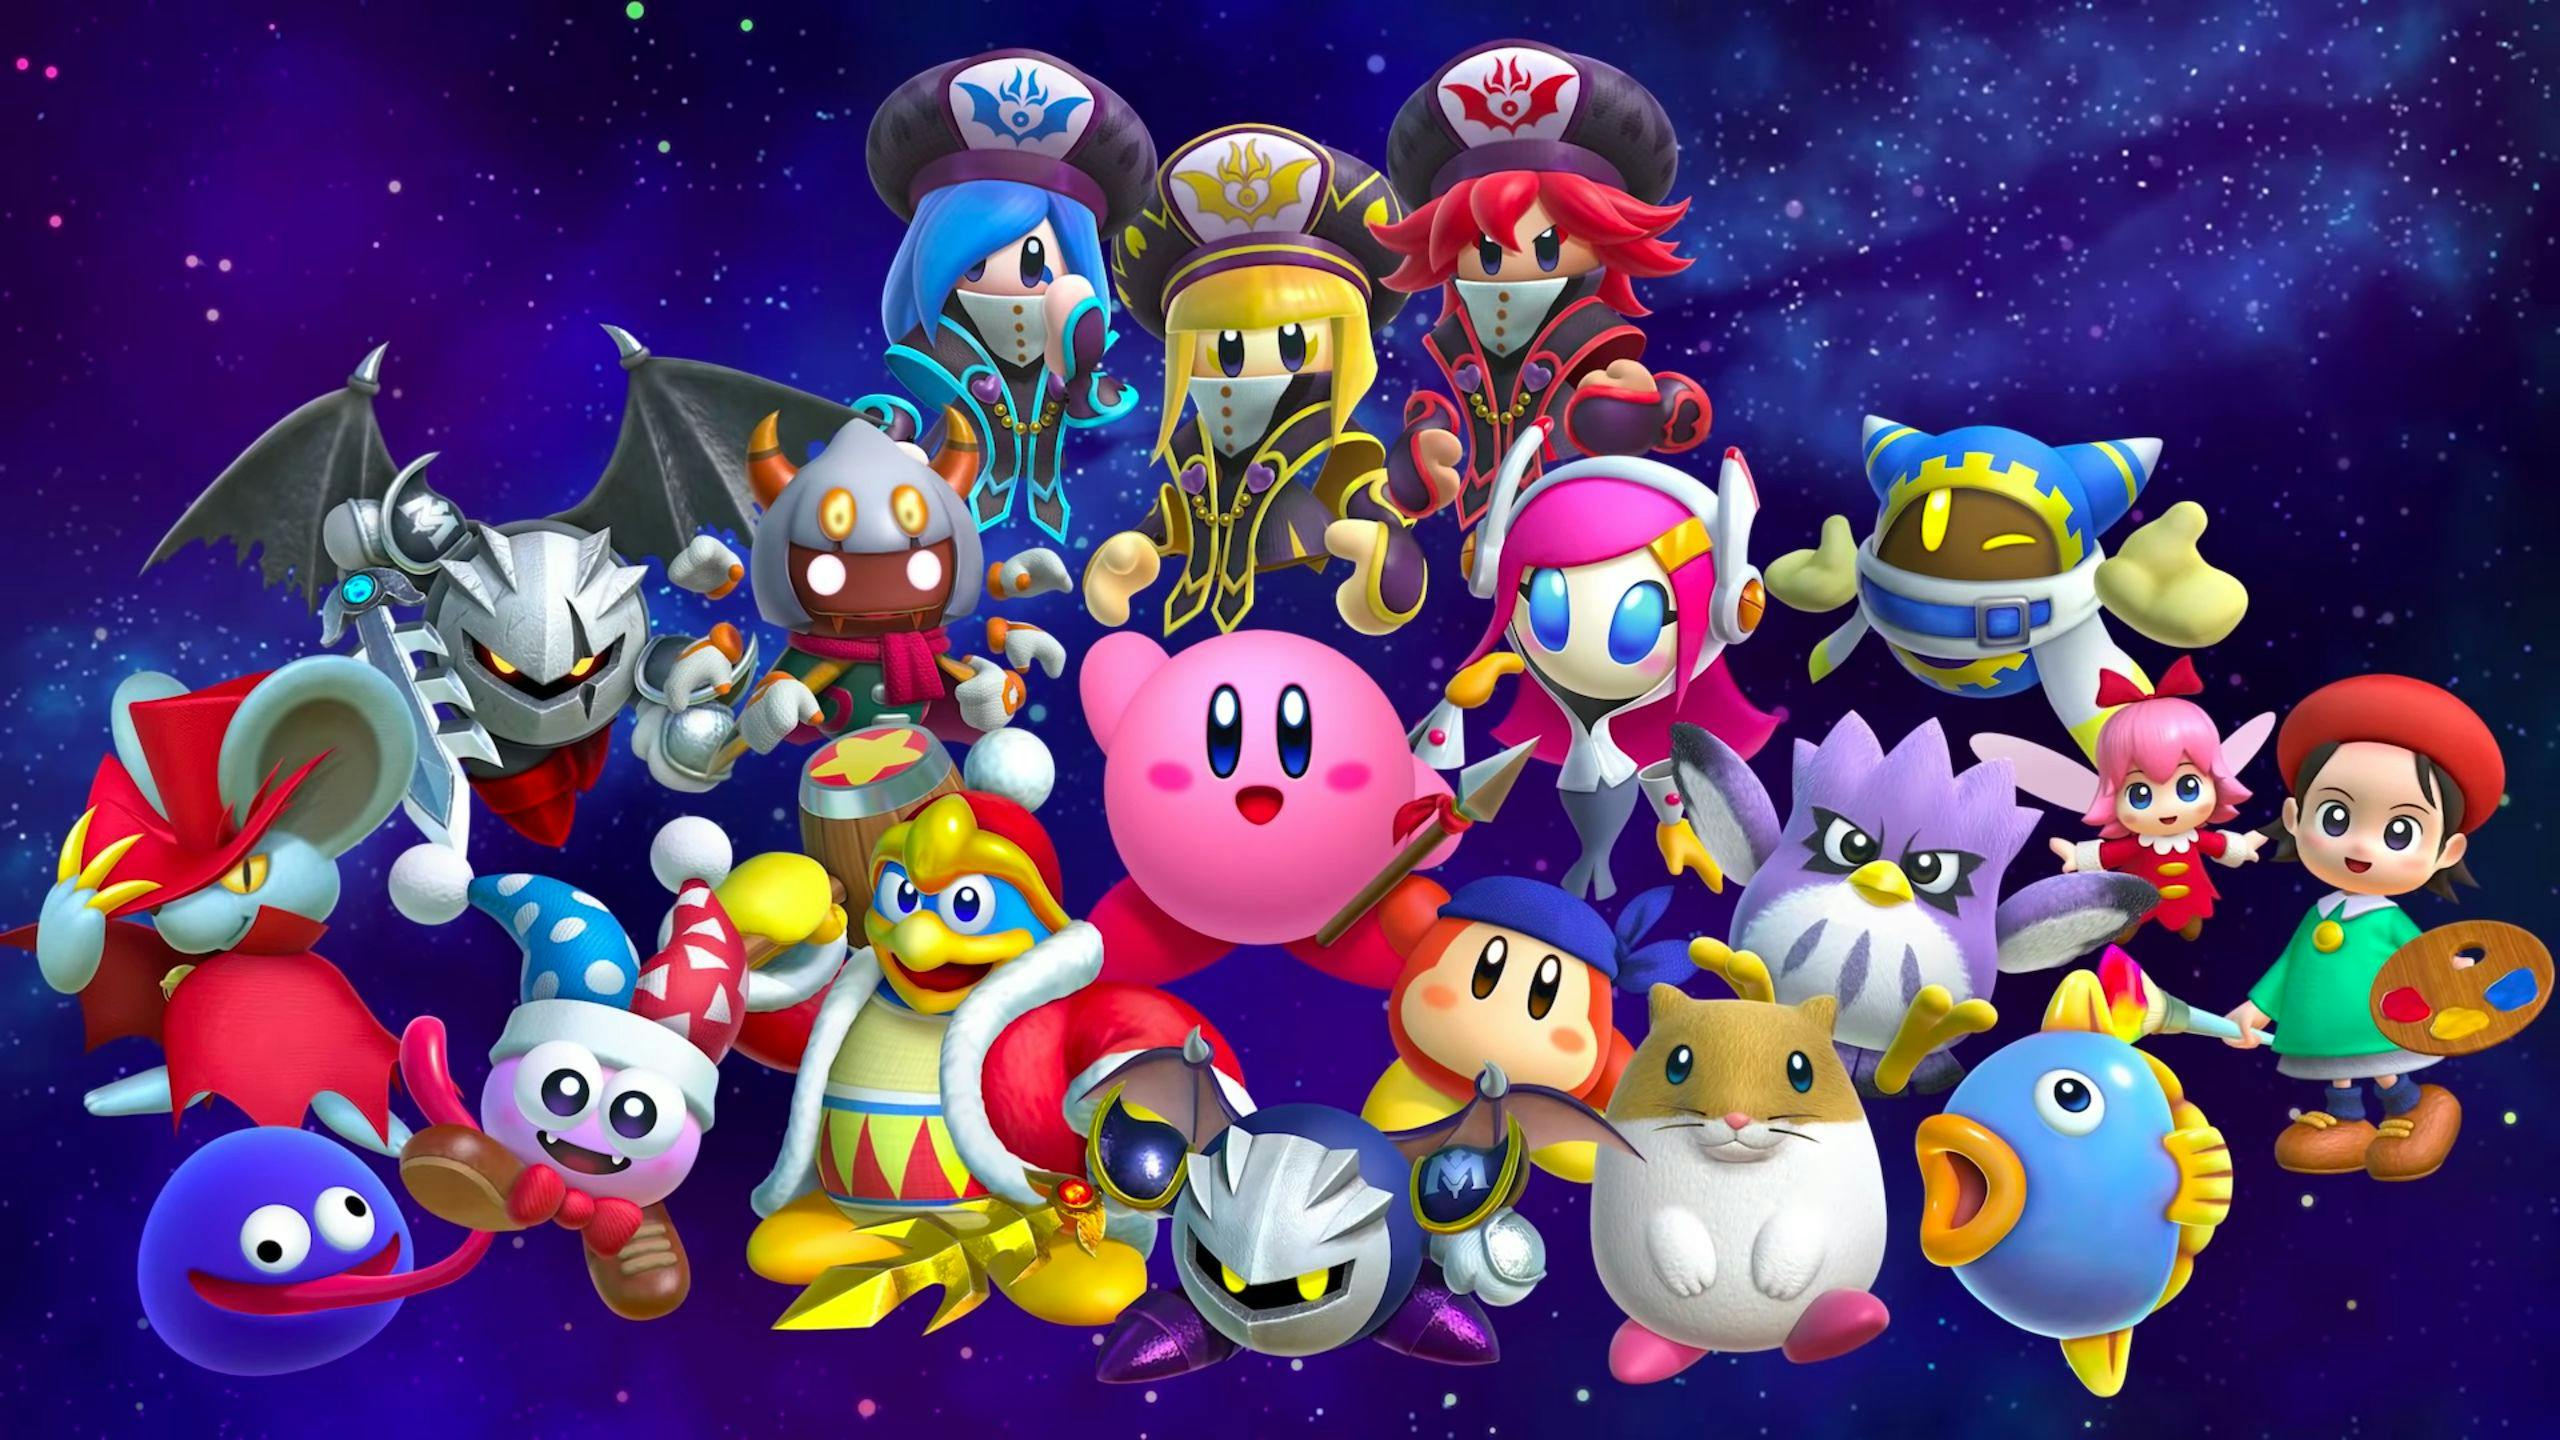 Kirby and the Forgotten Land - Wikipedia